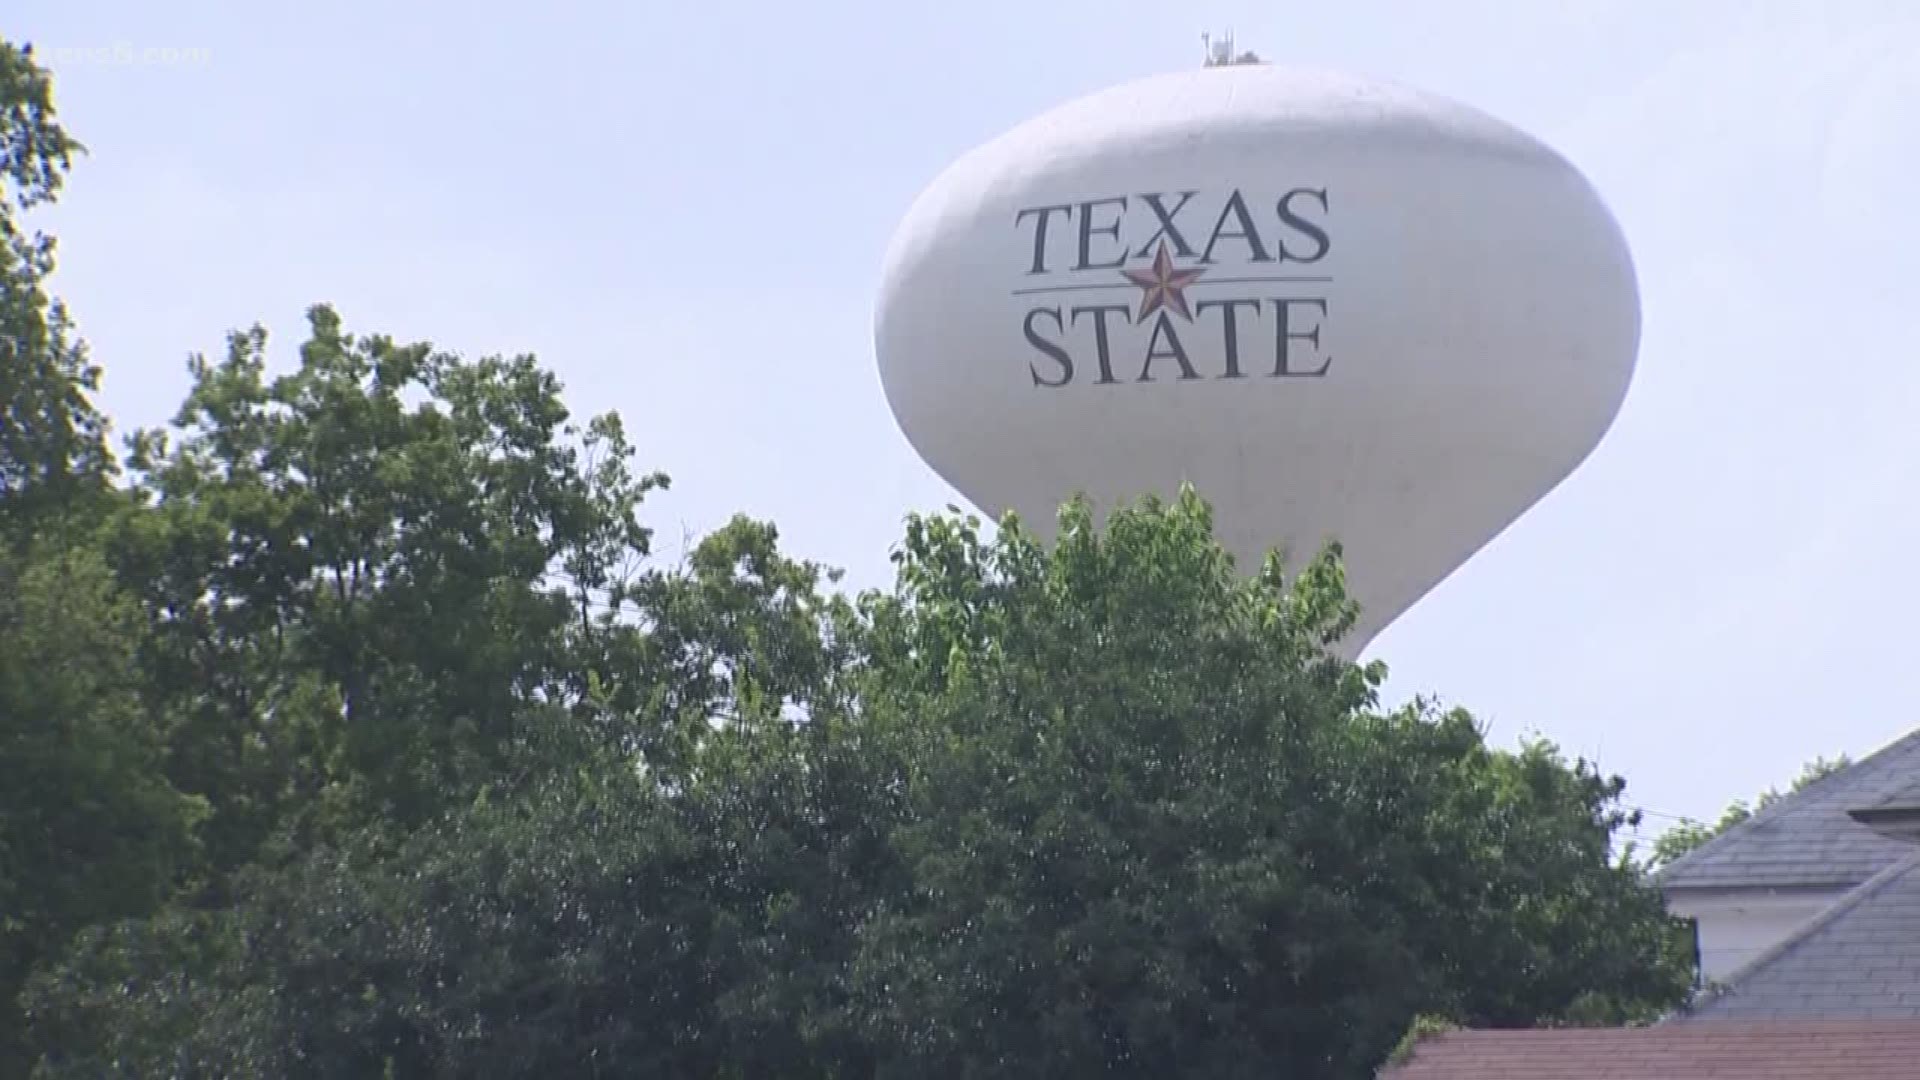 News rules for students in the Greek System at Texas State. University leaders have decided to insist on changes after the death of a fraternity pledge last fall.